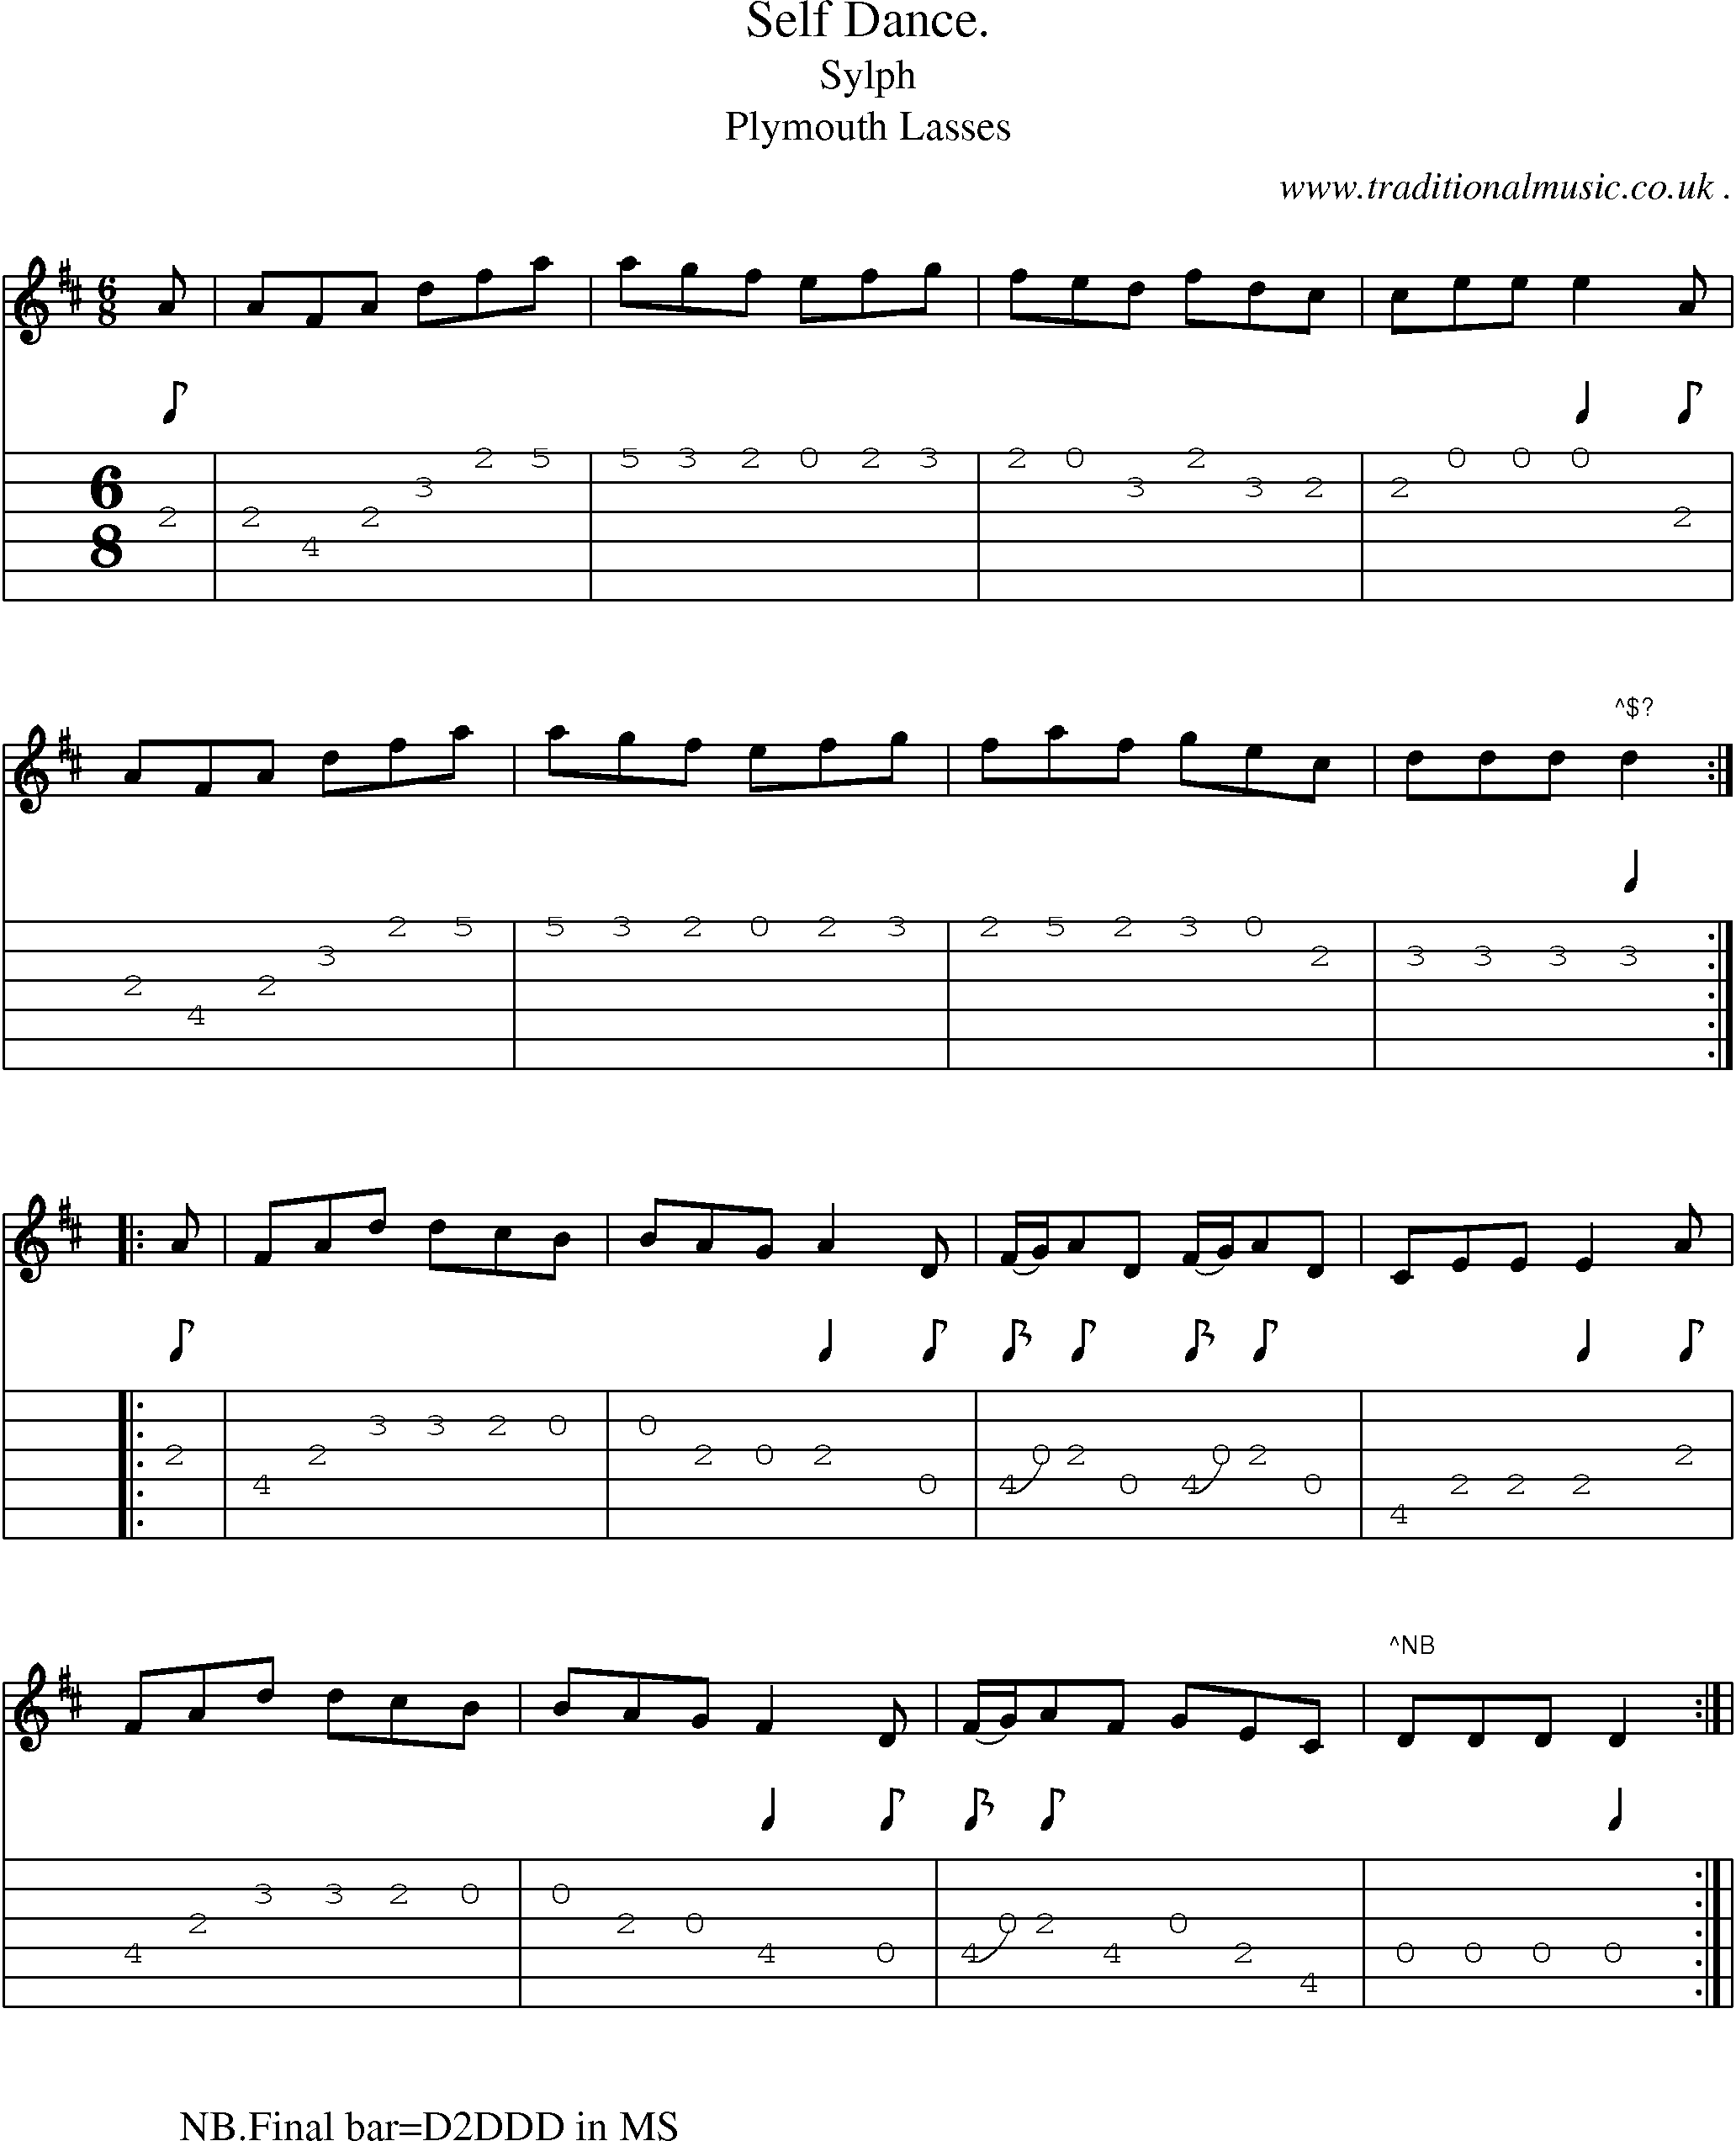 Sheet-Music and Guitar Tabs for Self Dance